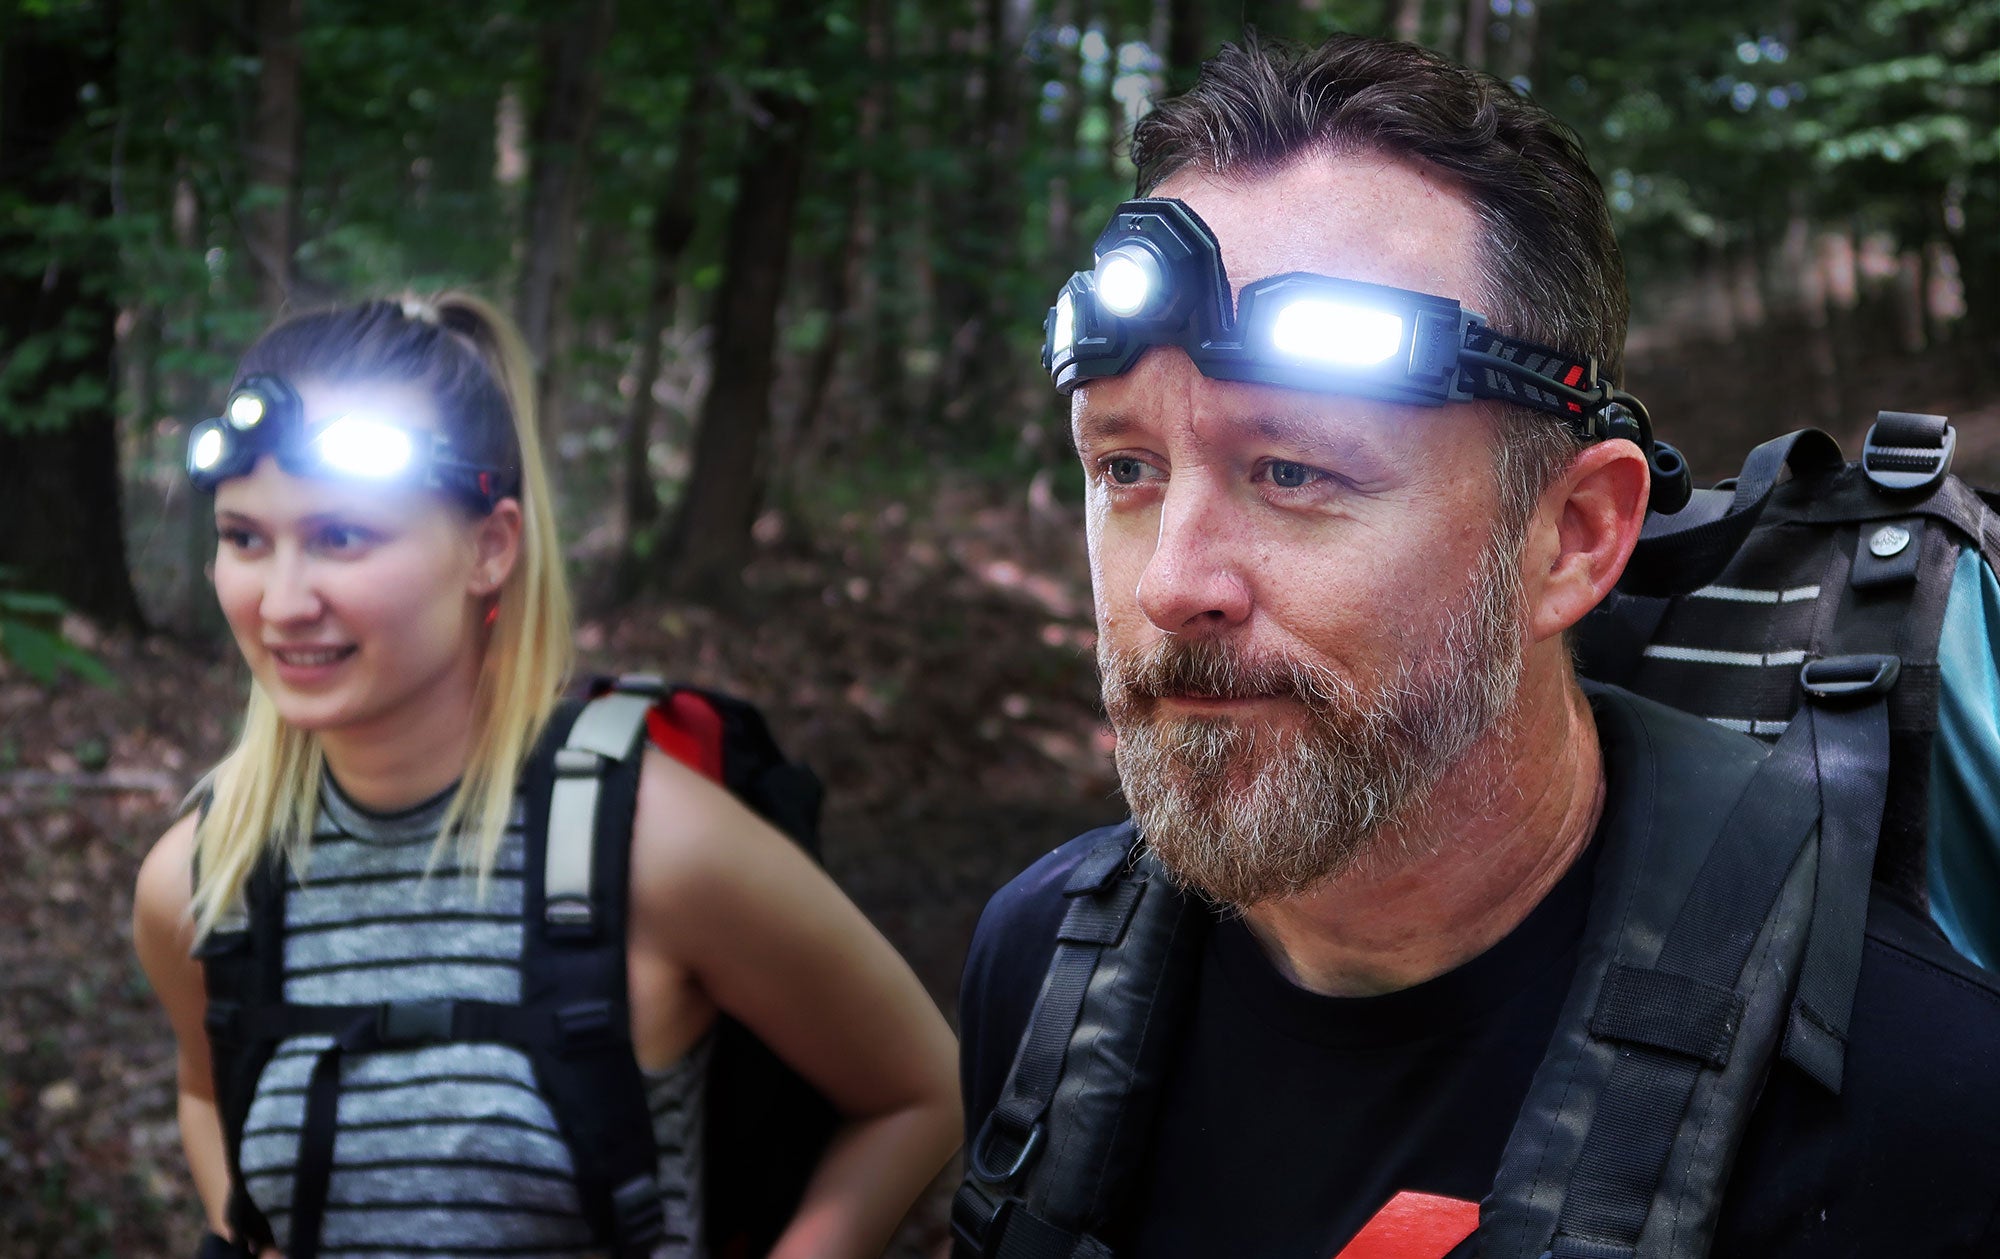 Close up lifestyle image of a man and woman out in the woods backpacking/hiking with headlamp pros on.